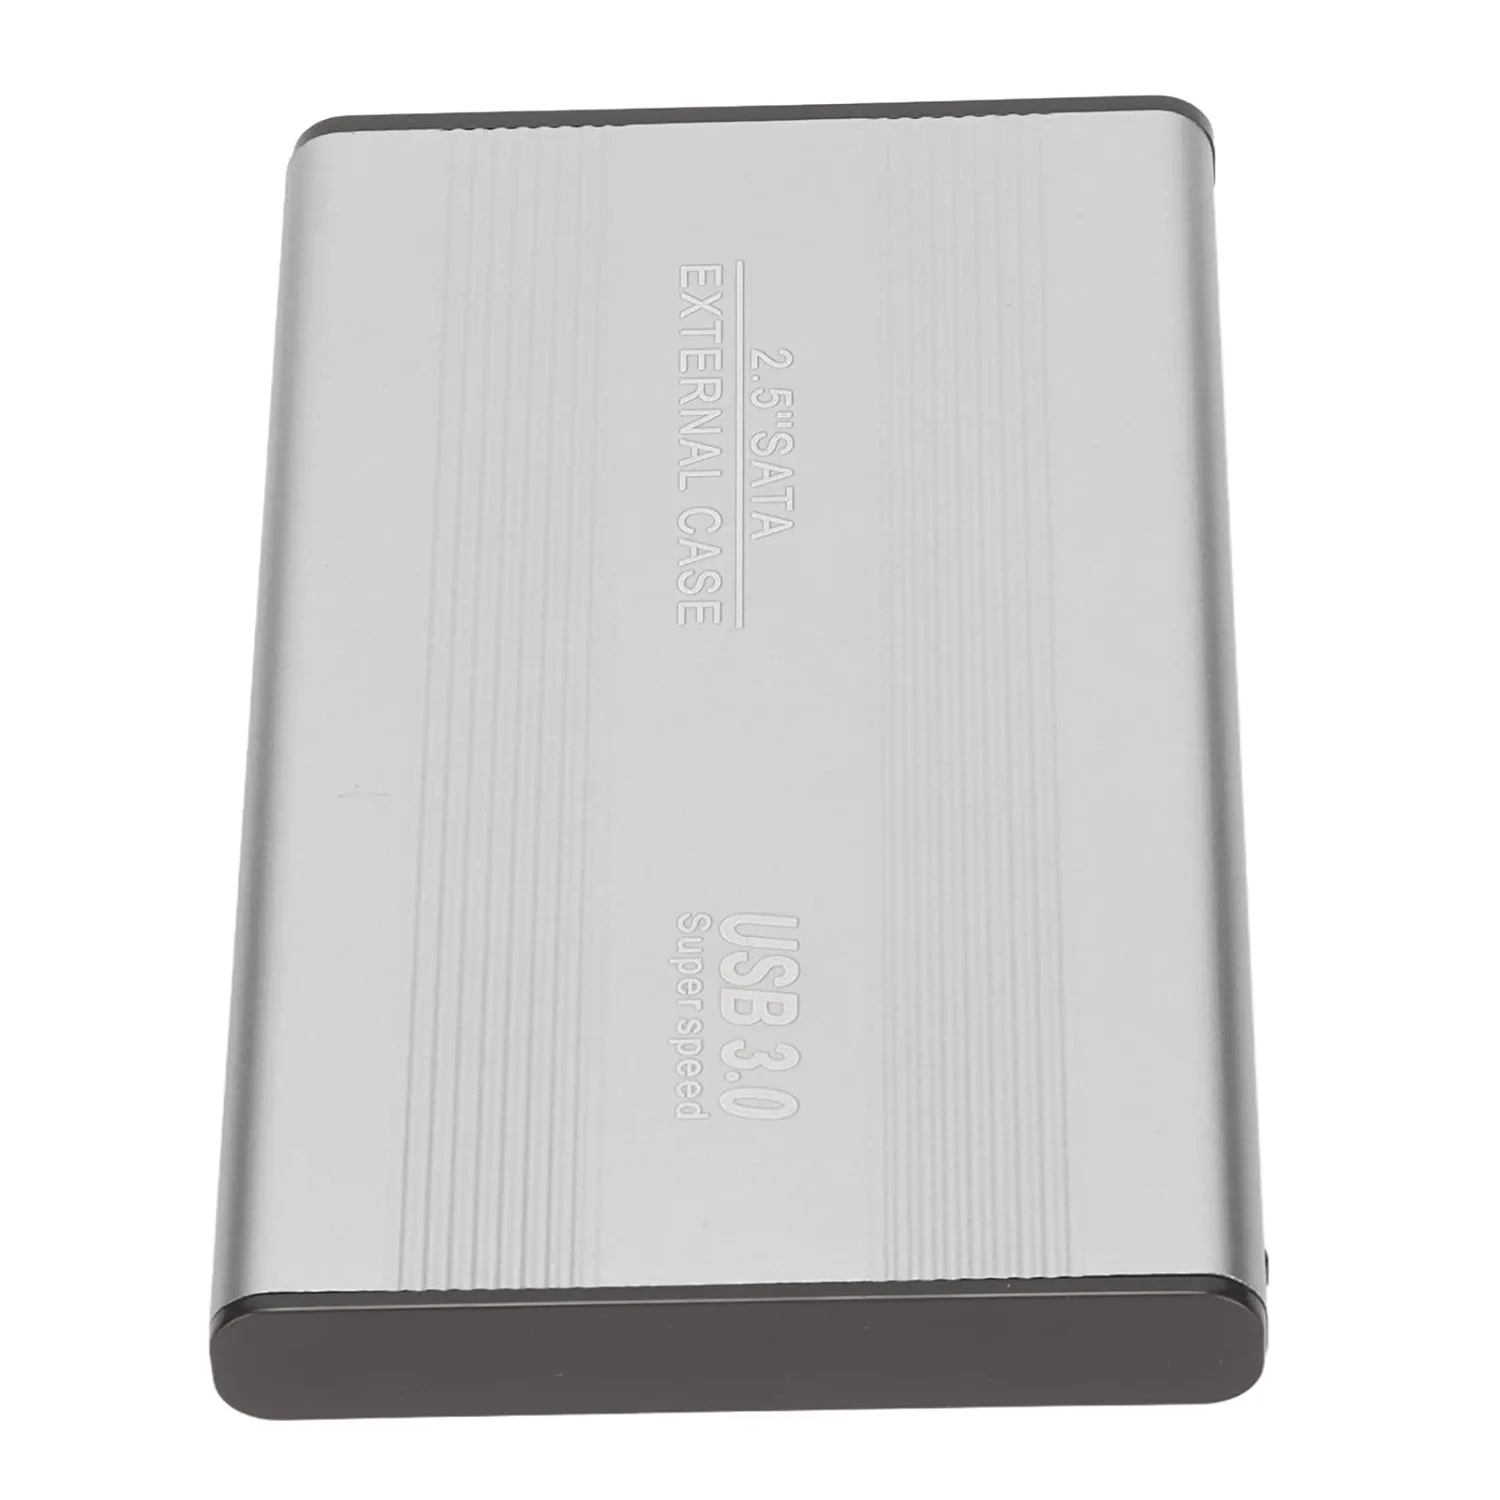 2.5 USB 3.0 HDD Enclosure Easy to Use Portable hdd casing - Royal